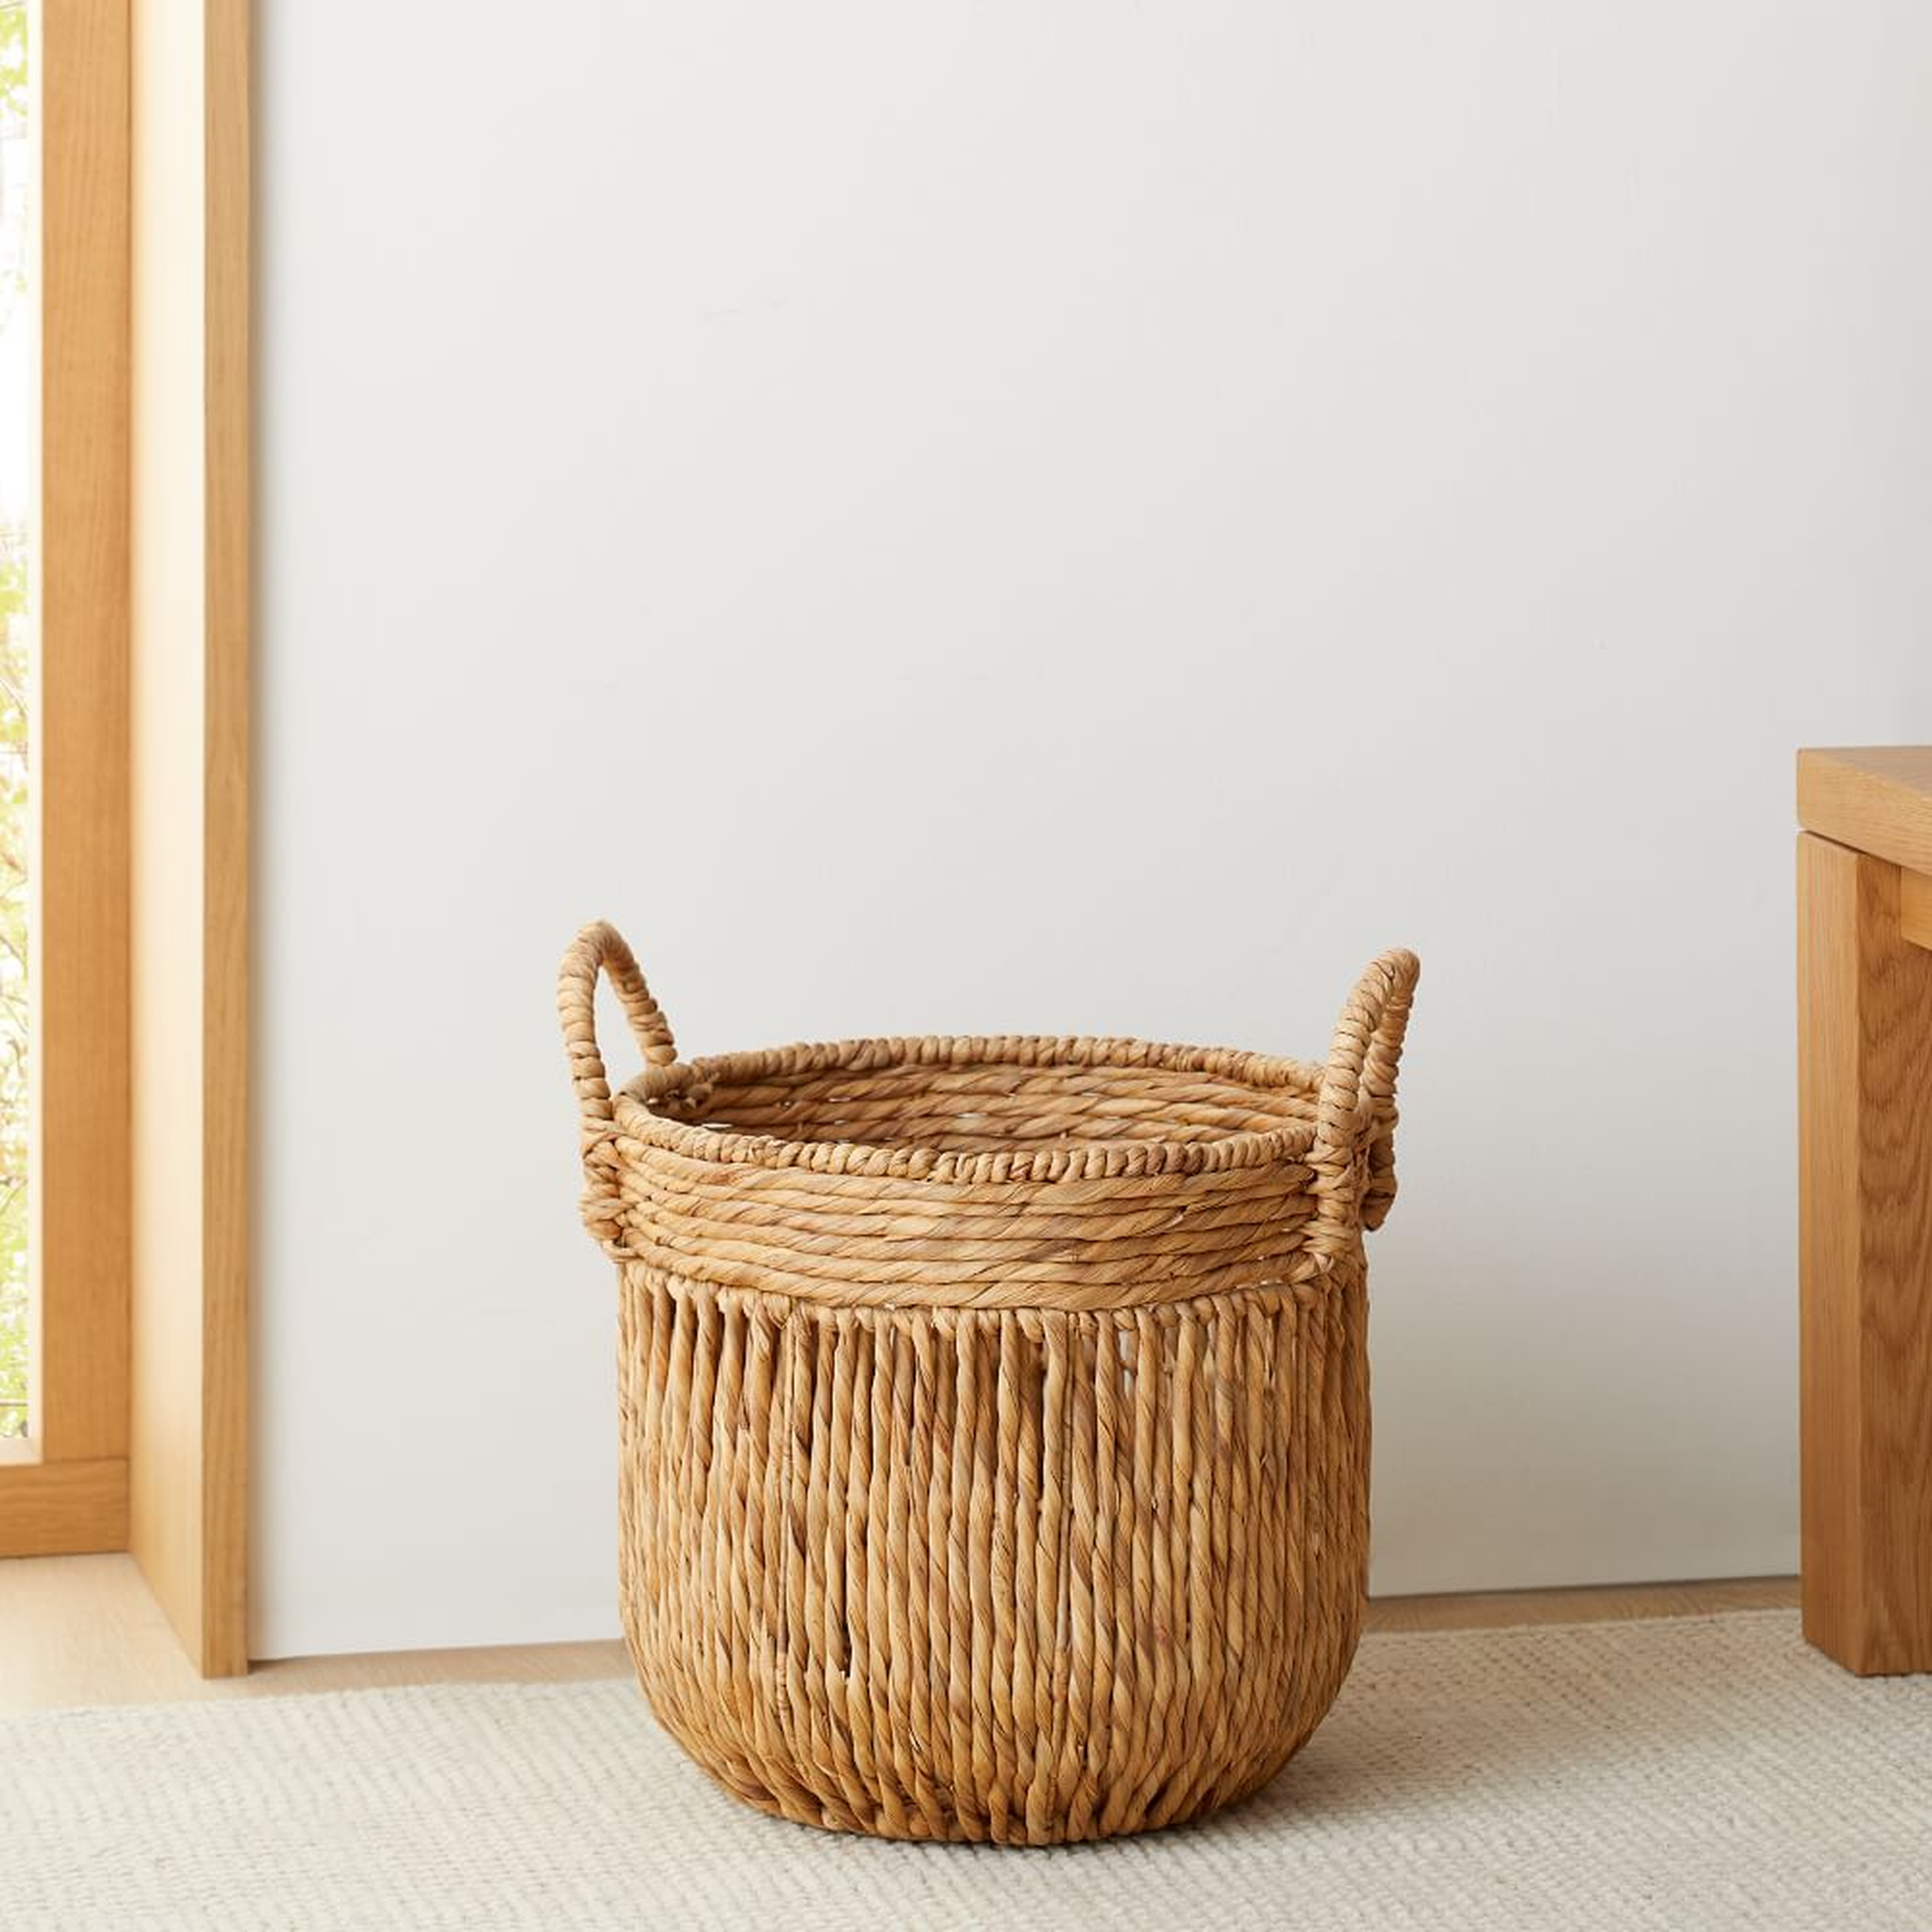 Vertical Lines Baskets, Small Round, Natural - West Elm